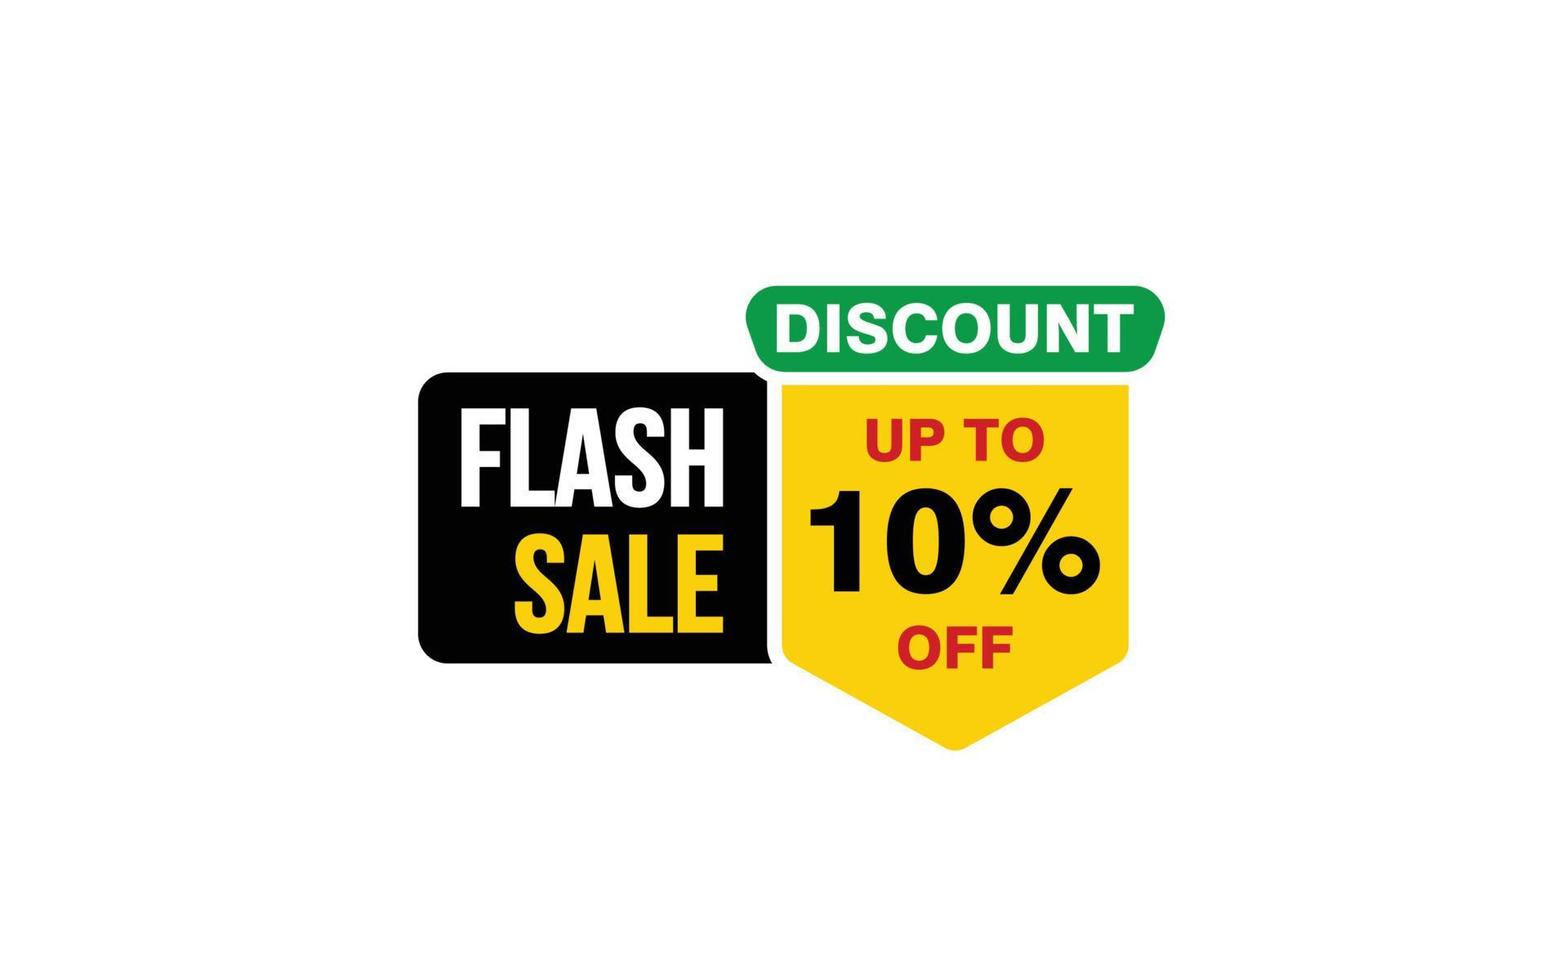 10 Percent FLASH SALE offer, clearance, promotion banner layout with sticker style. vector